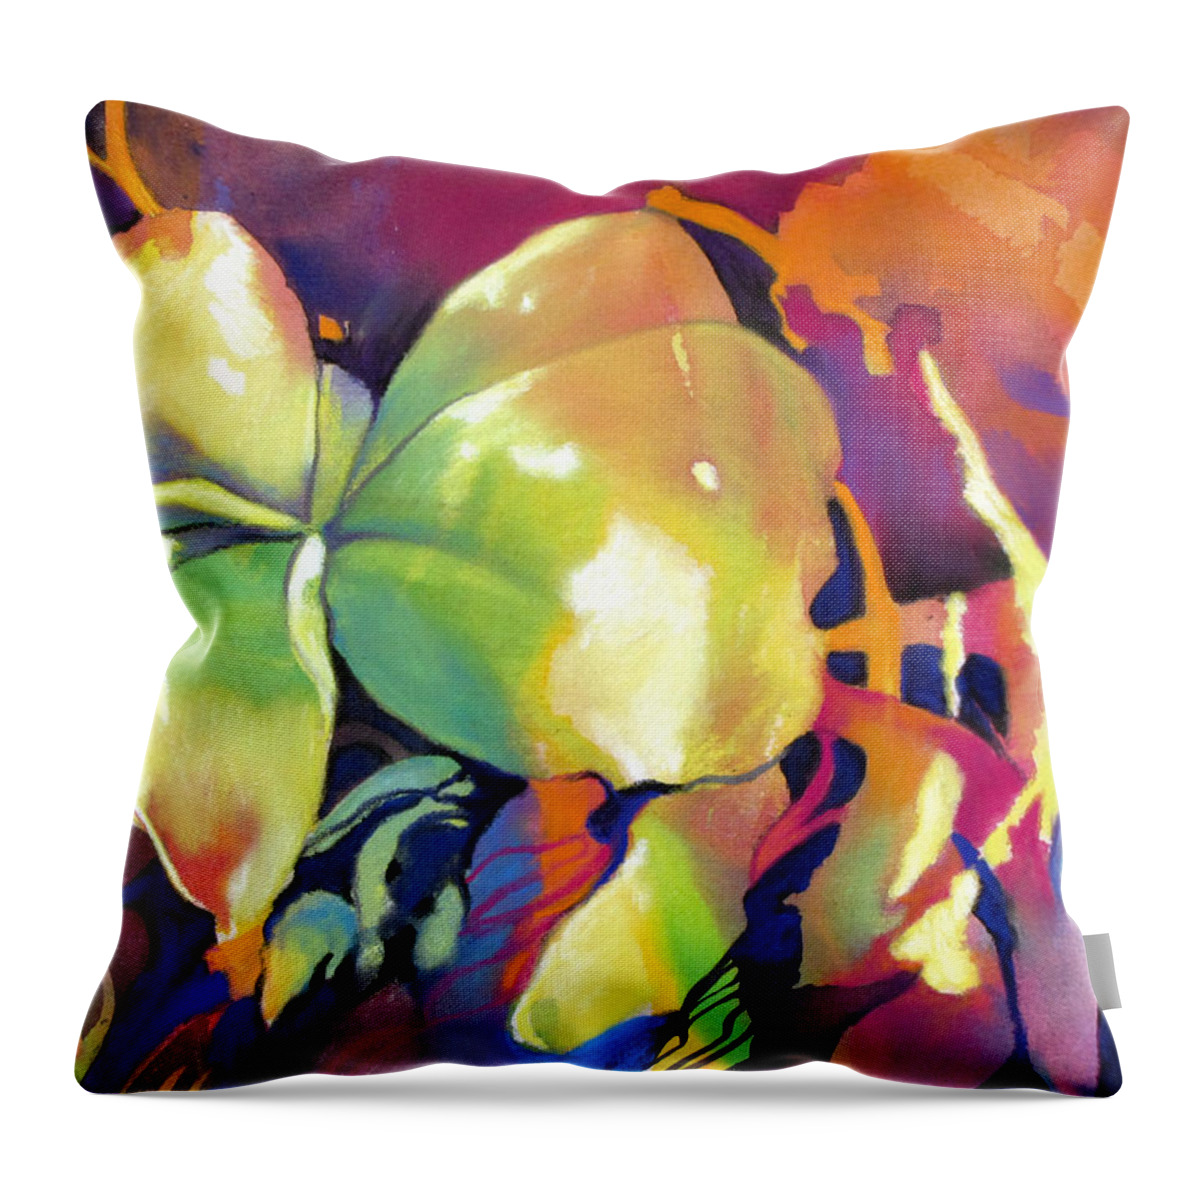 Abstract Throw Pillow featuring the painting Frangipani Fantasy by Rae Andrews